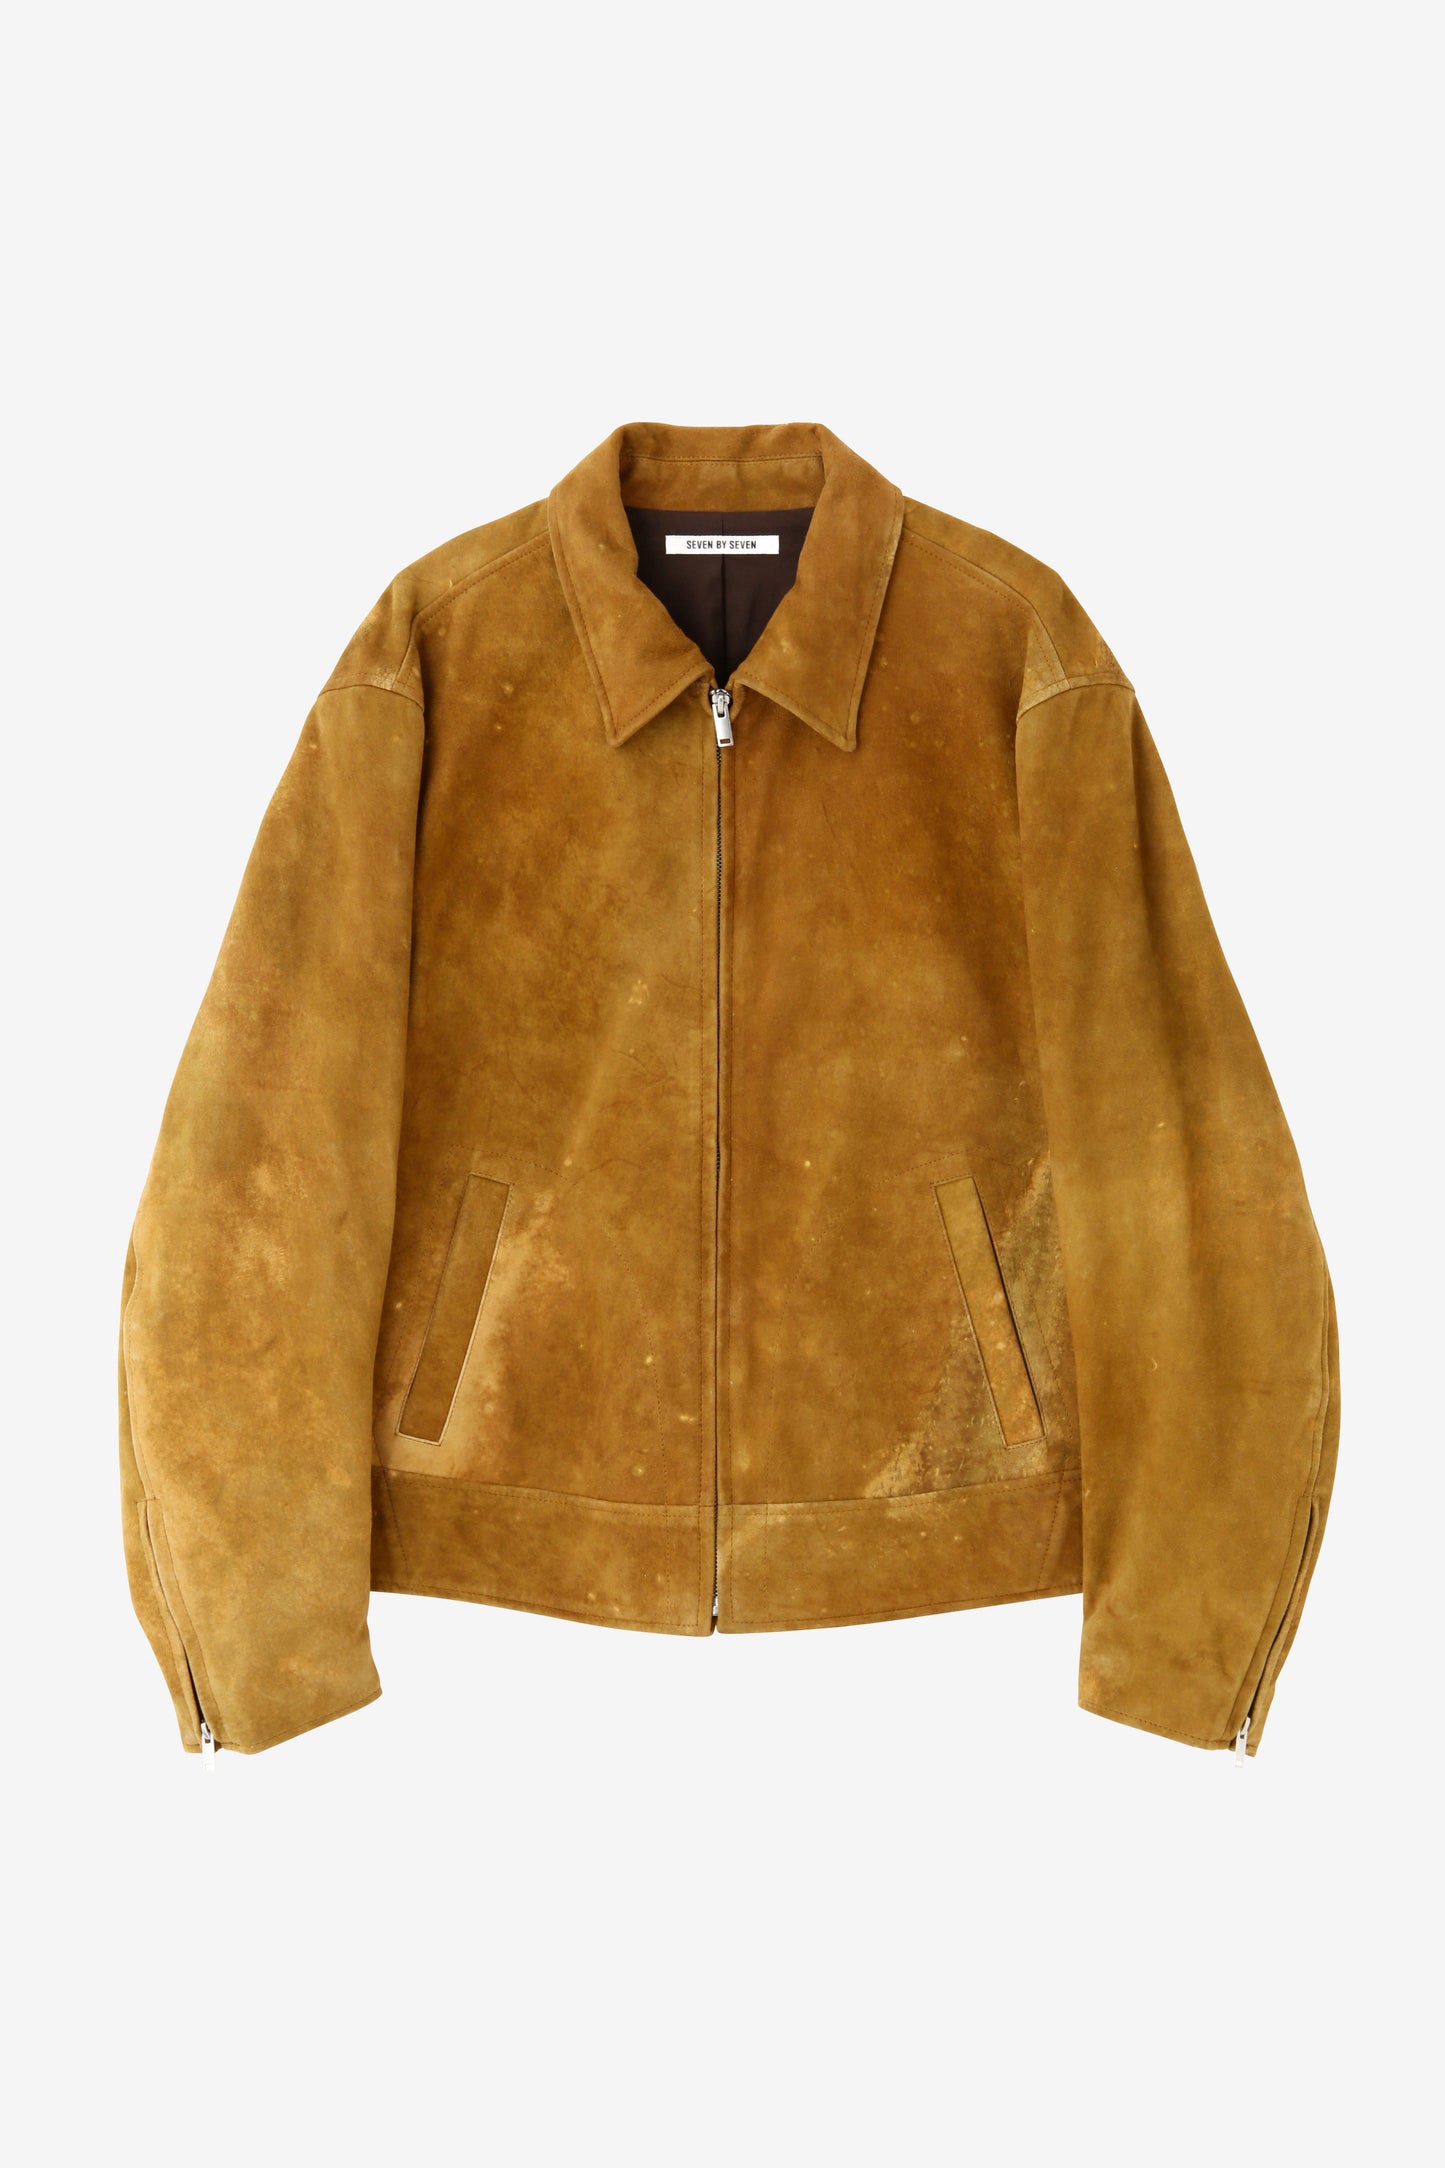 SUEDE LEATHER RIDERS JACKET -Sheep suede cashmere finish-